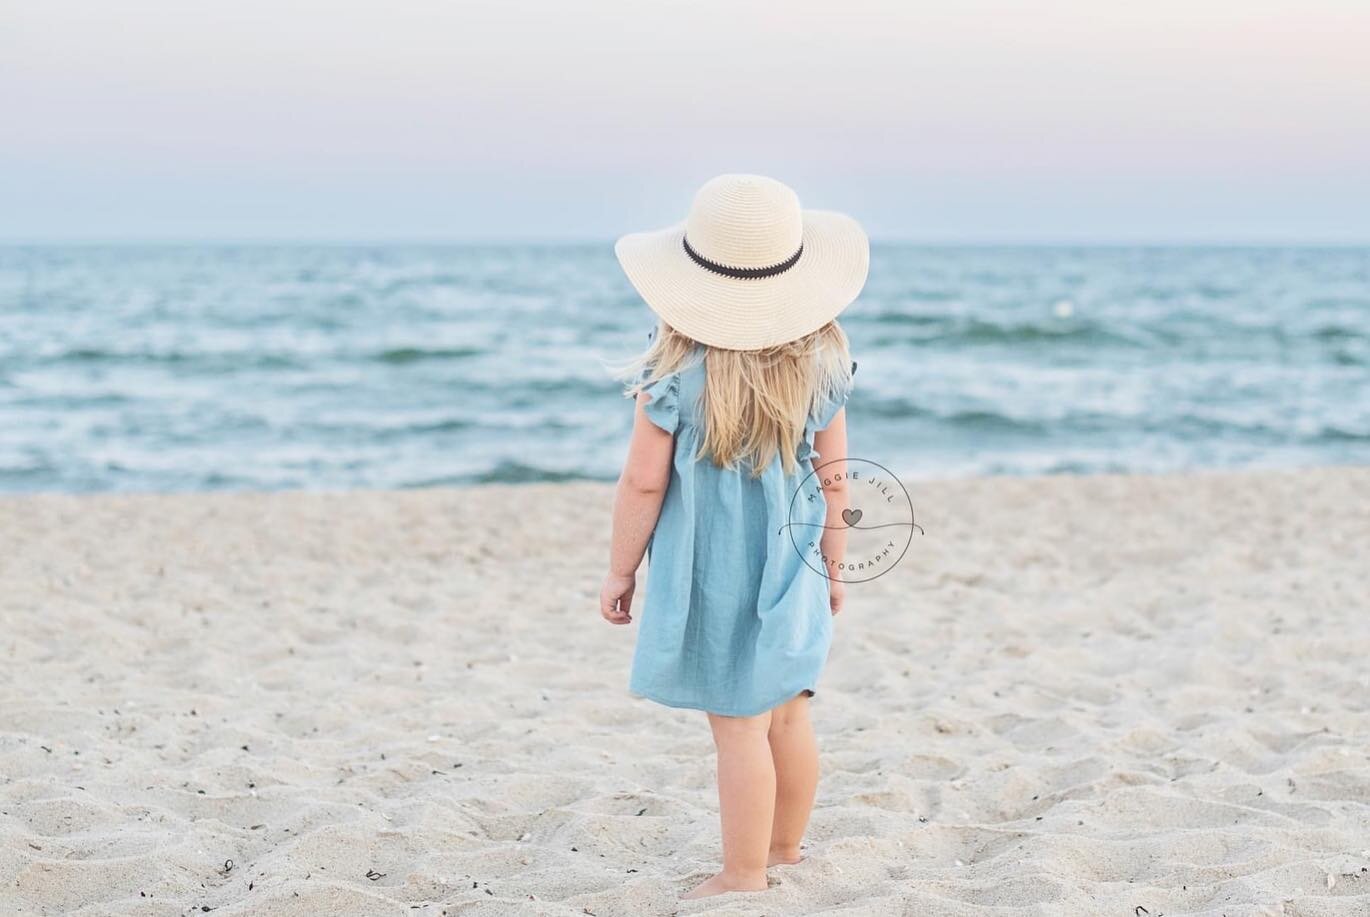 Swipe ➡️ to see same beach, same &quot;baby&quot;, same hat 🥲 How do we slow down time?!?